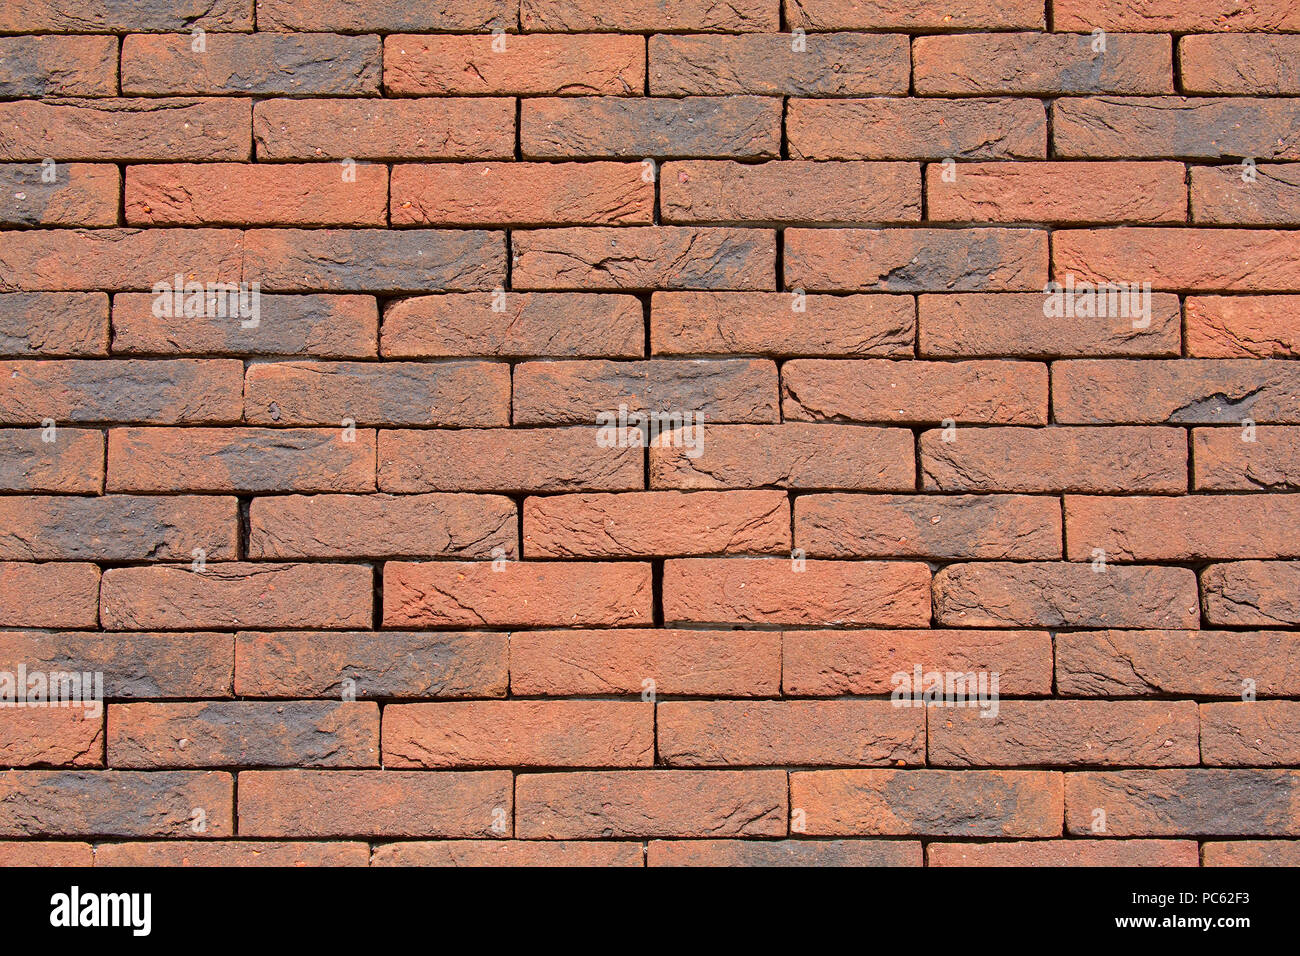 Background wall of bricks without cement joints Stock Photo